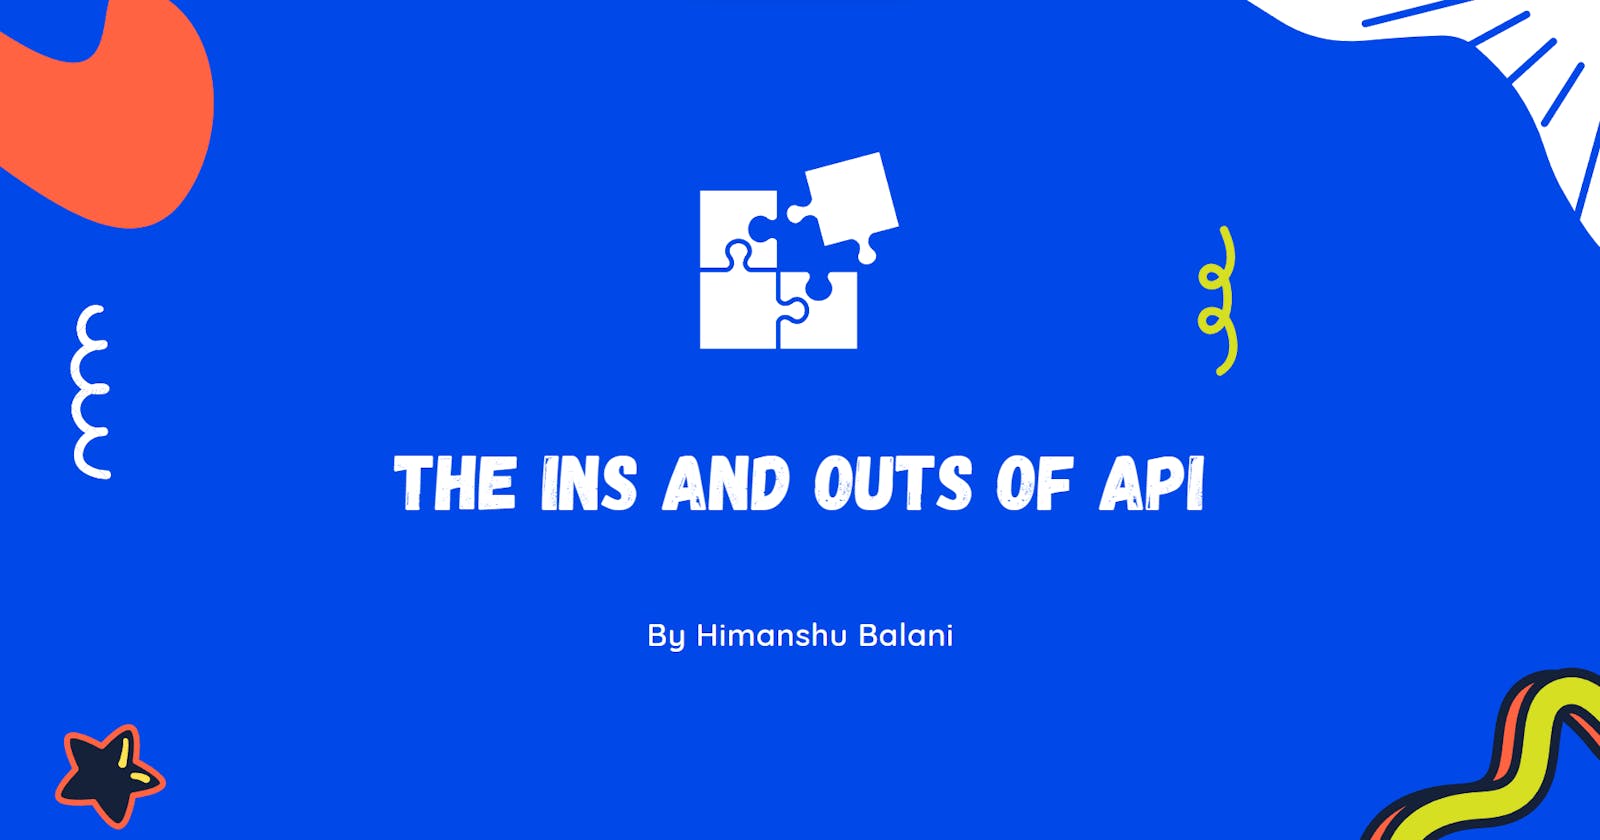 The Ins and Outs of APIs